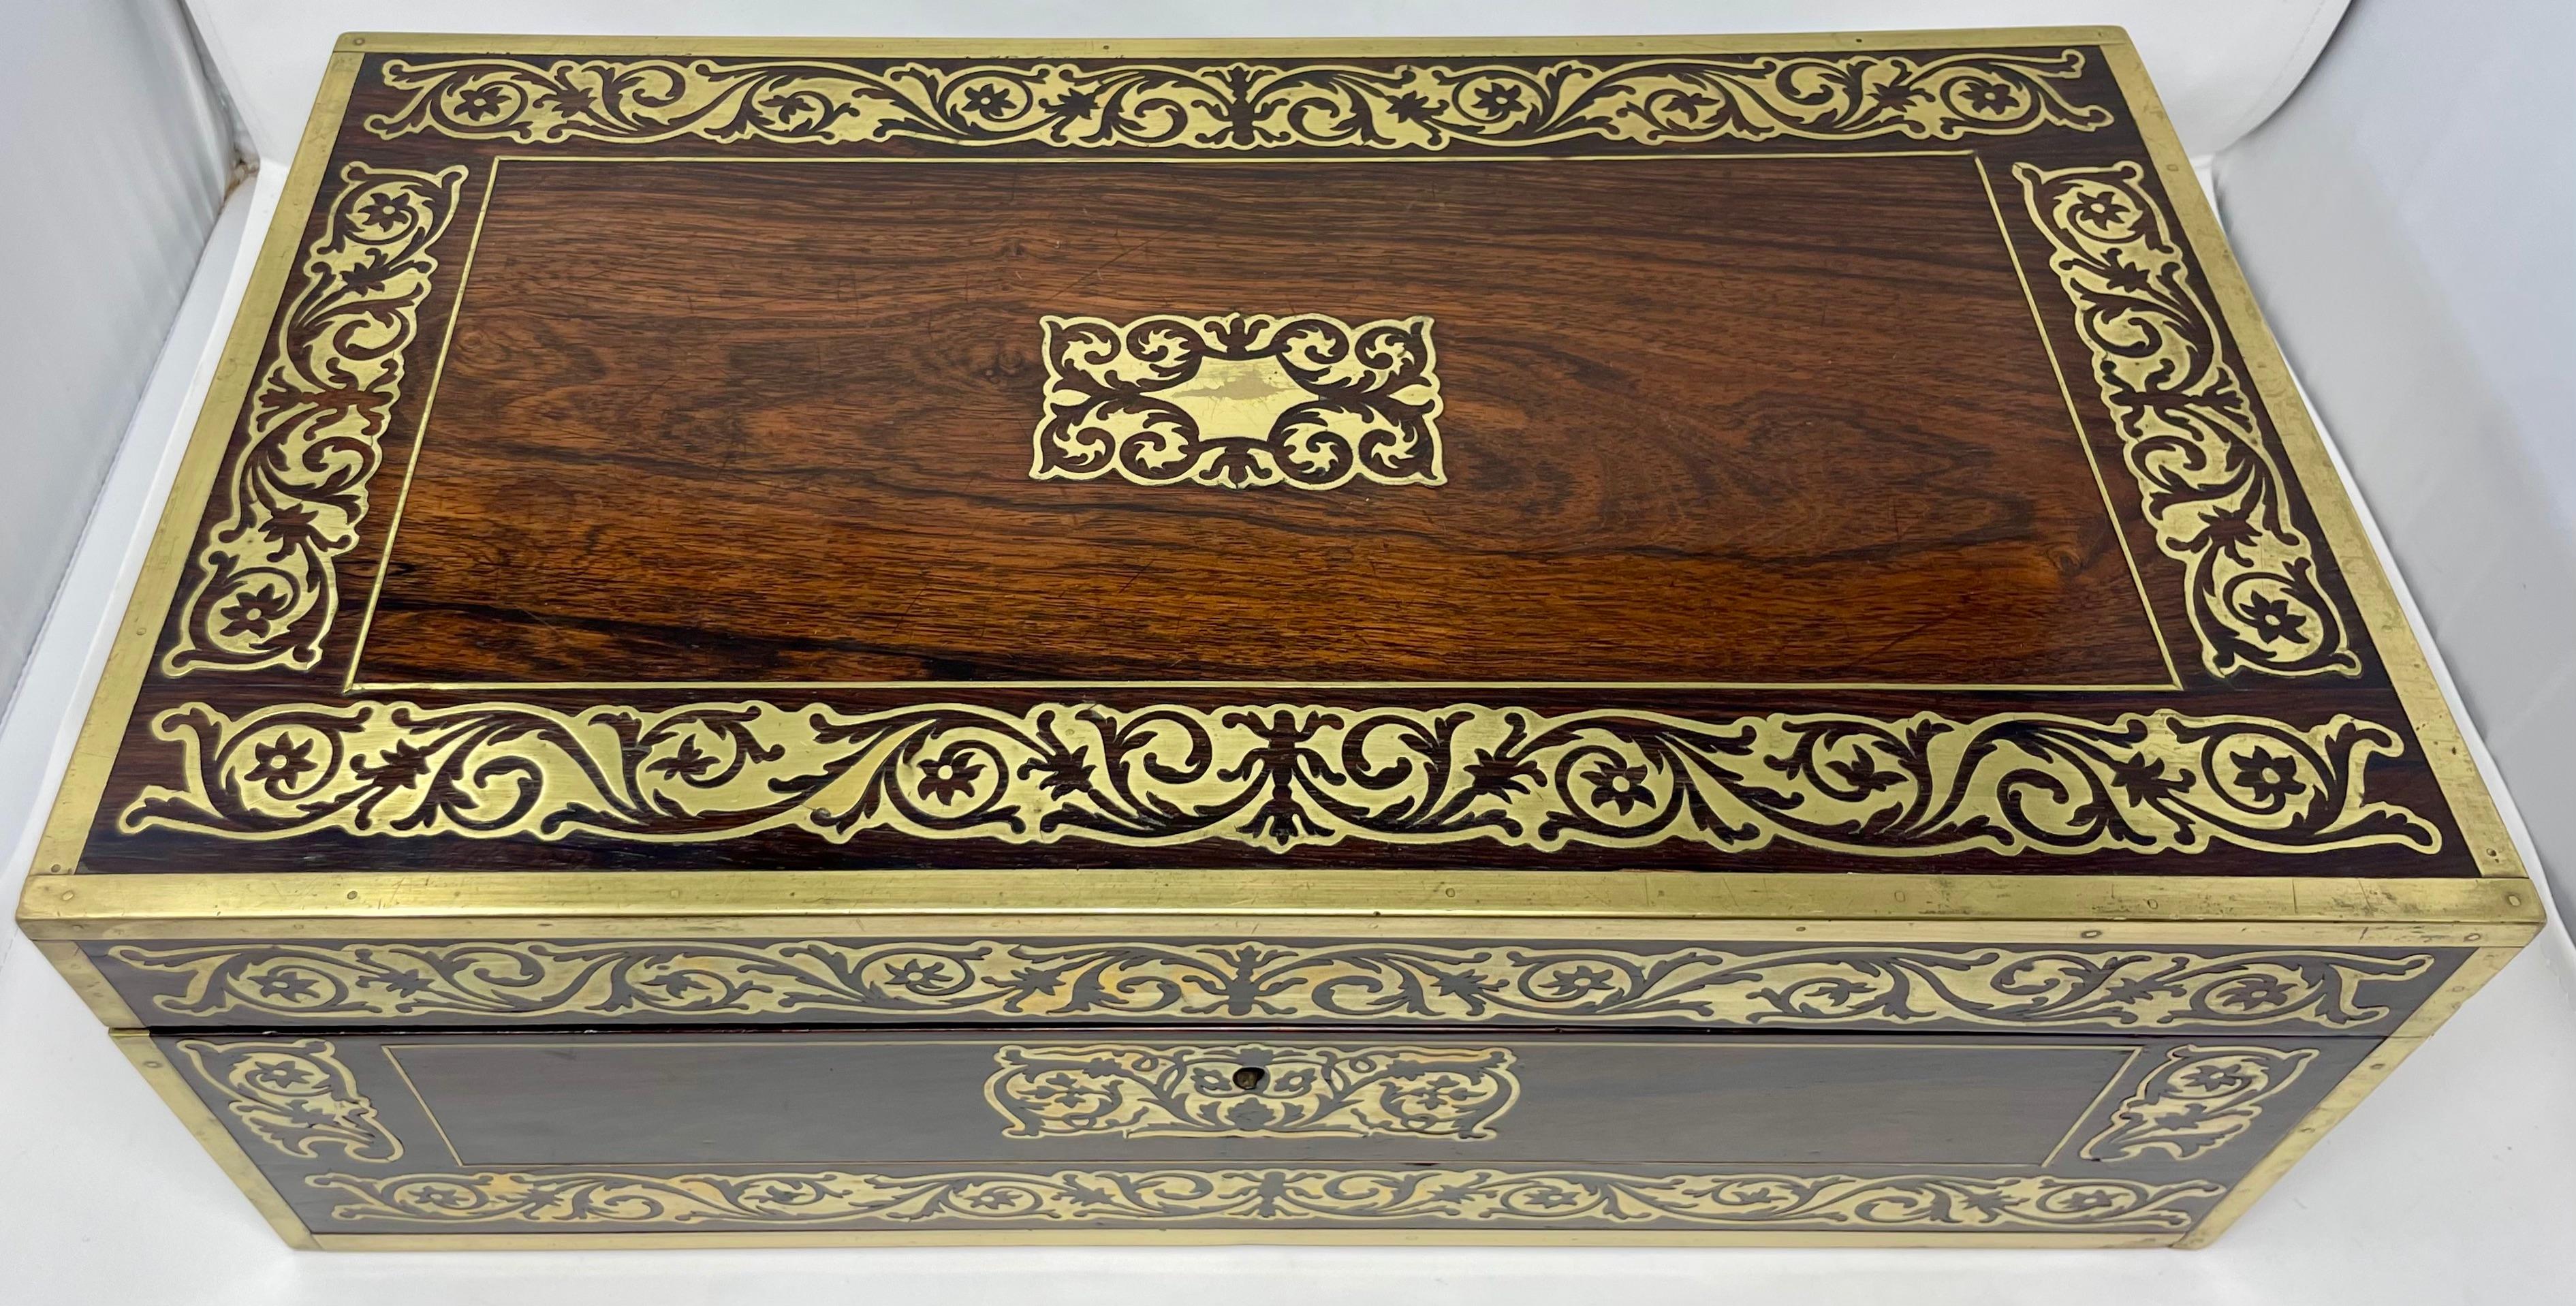 Antique English Regency Rosewood Travelling Lap Desk Box, Circa 1830 In Good Condition For Sale In New Orleans, LA